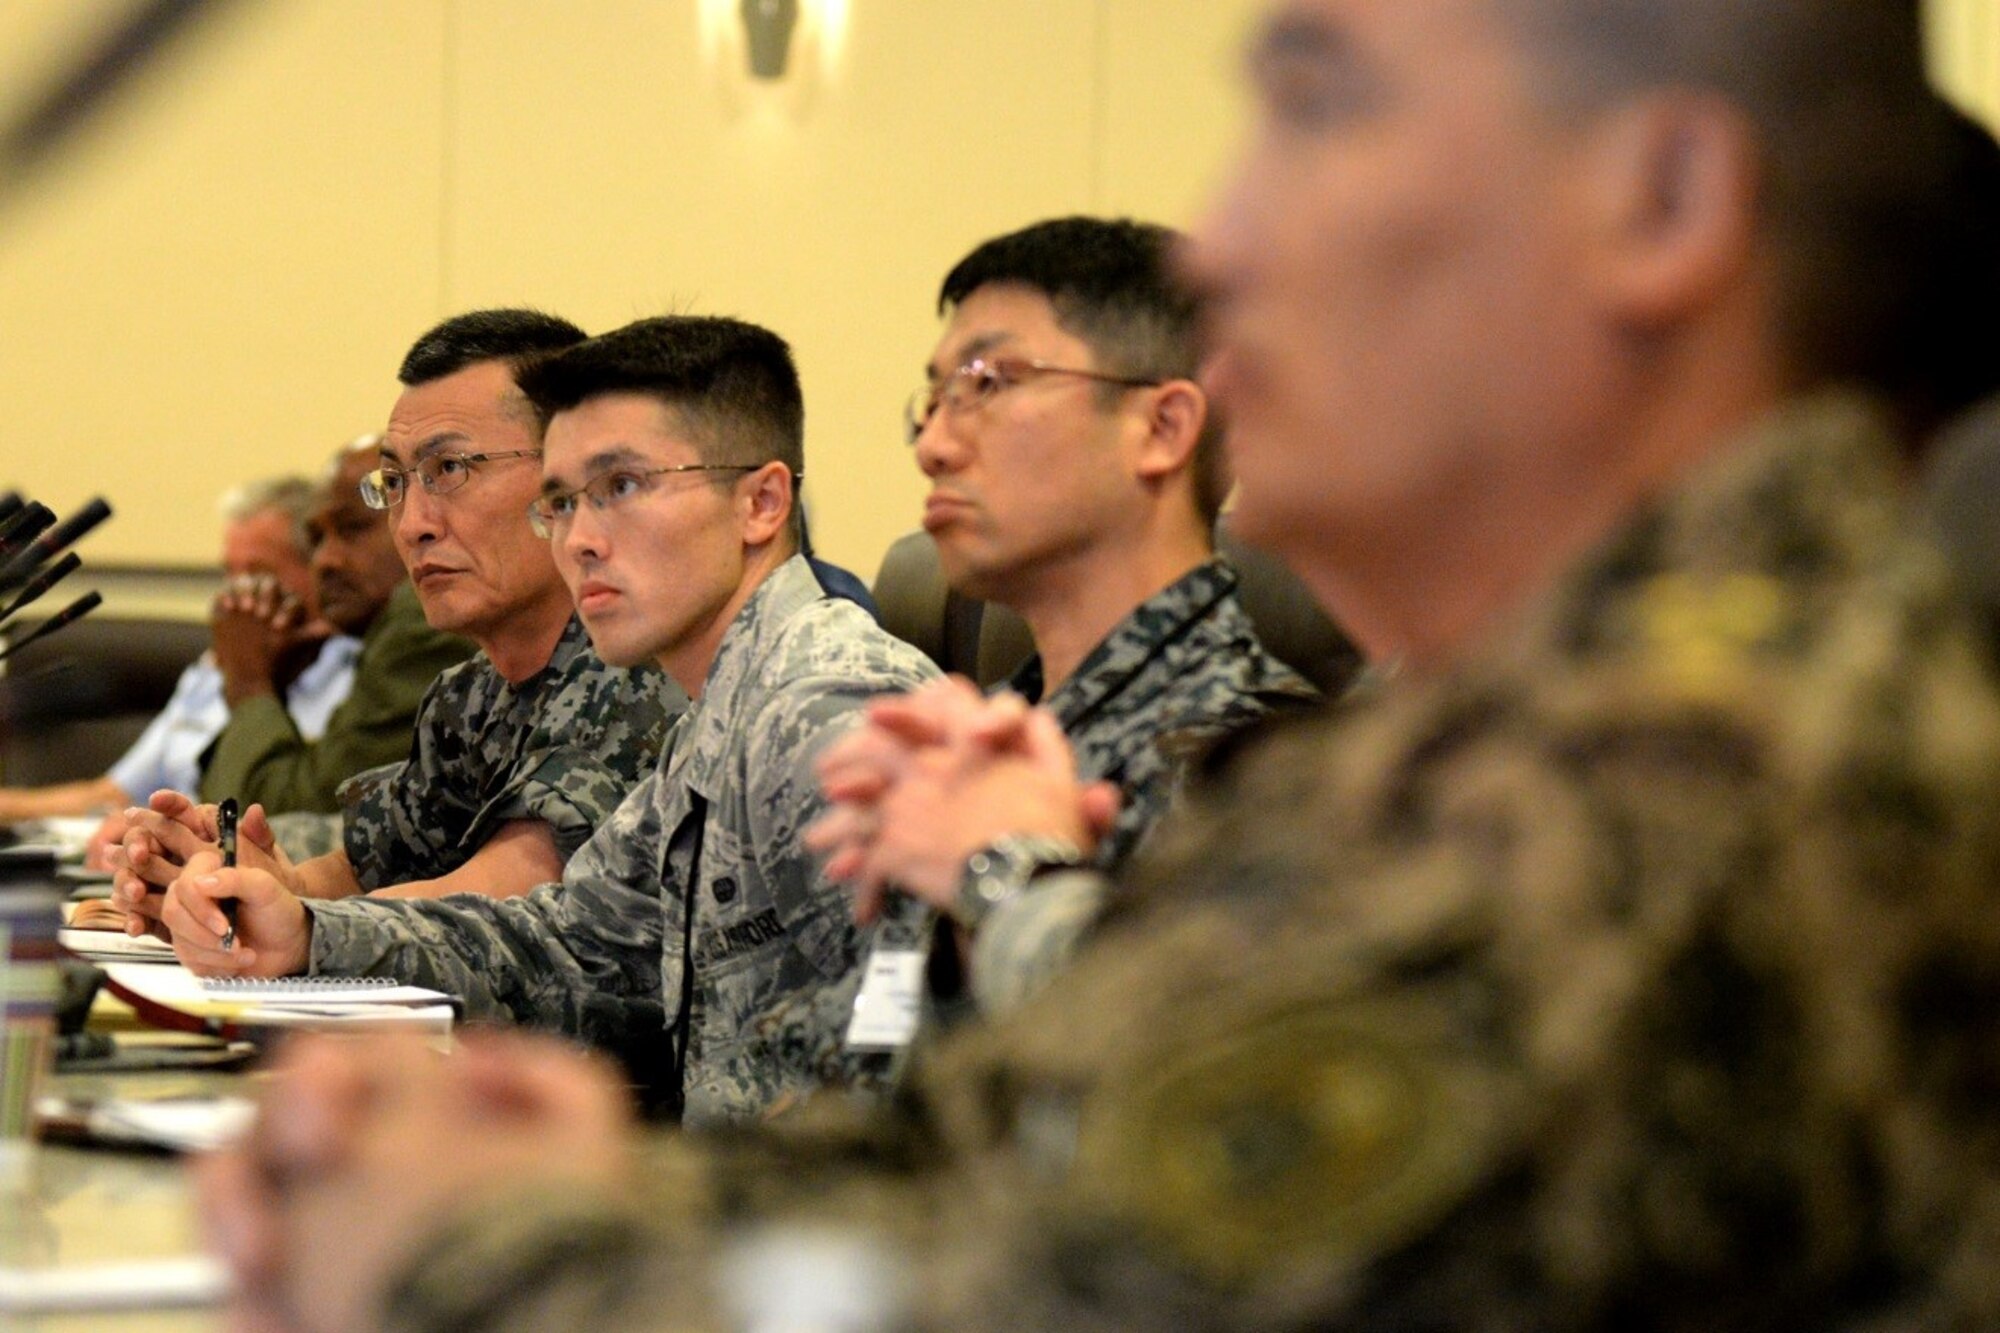 Attendees listen to a Profession of Arms Center of Excellence brief during the Senior Enlisted Leader International Summit (SELIS) on Joint Base Andrews, Md., July 13, 2016. The SELIS is a forum of international senior enlisted leaders hosted by Chief Master Sergeant of the Air Force James A. Cody. (U.S. Air Force photo/ Tech. Sgt. Matt Davis)